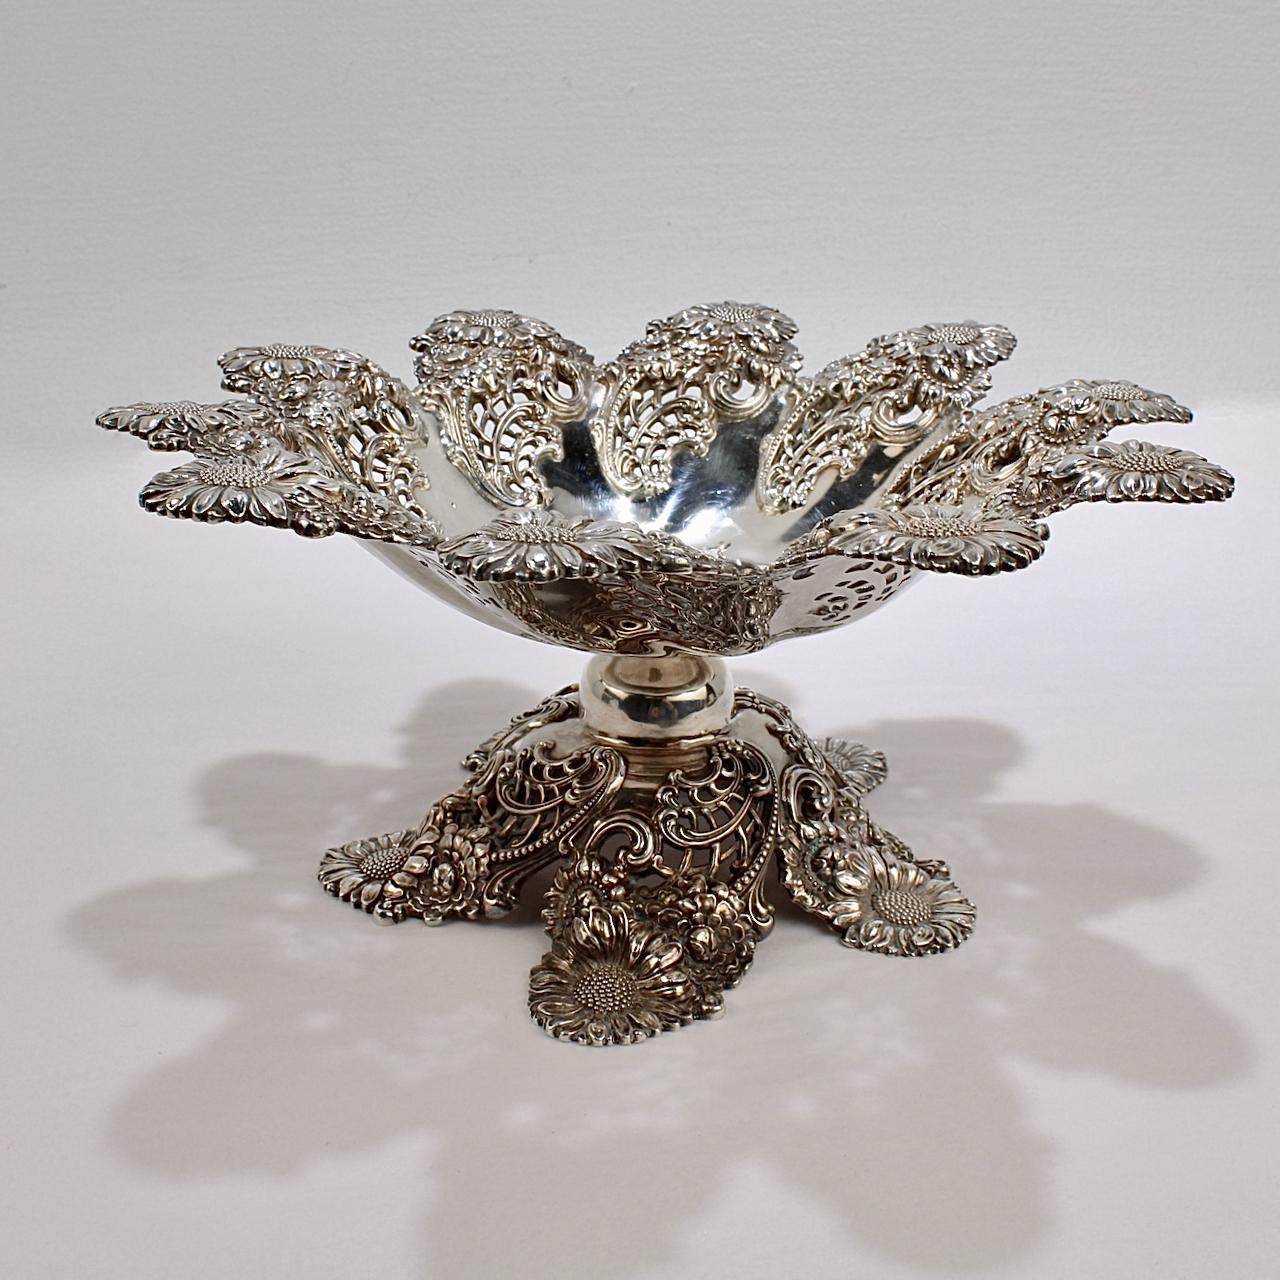 A very fine American Art Nouveau floral repoussé footed bowl or compote.

In sterling silver by Dominick and Haff.

With a pierced, repeating border of sunflowers, chrysanthemums, and poppies that is repeated on a conforming foot.

Simply a